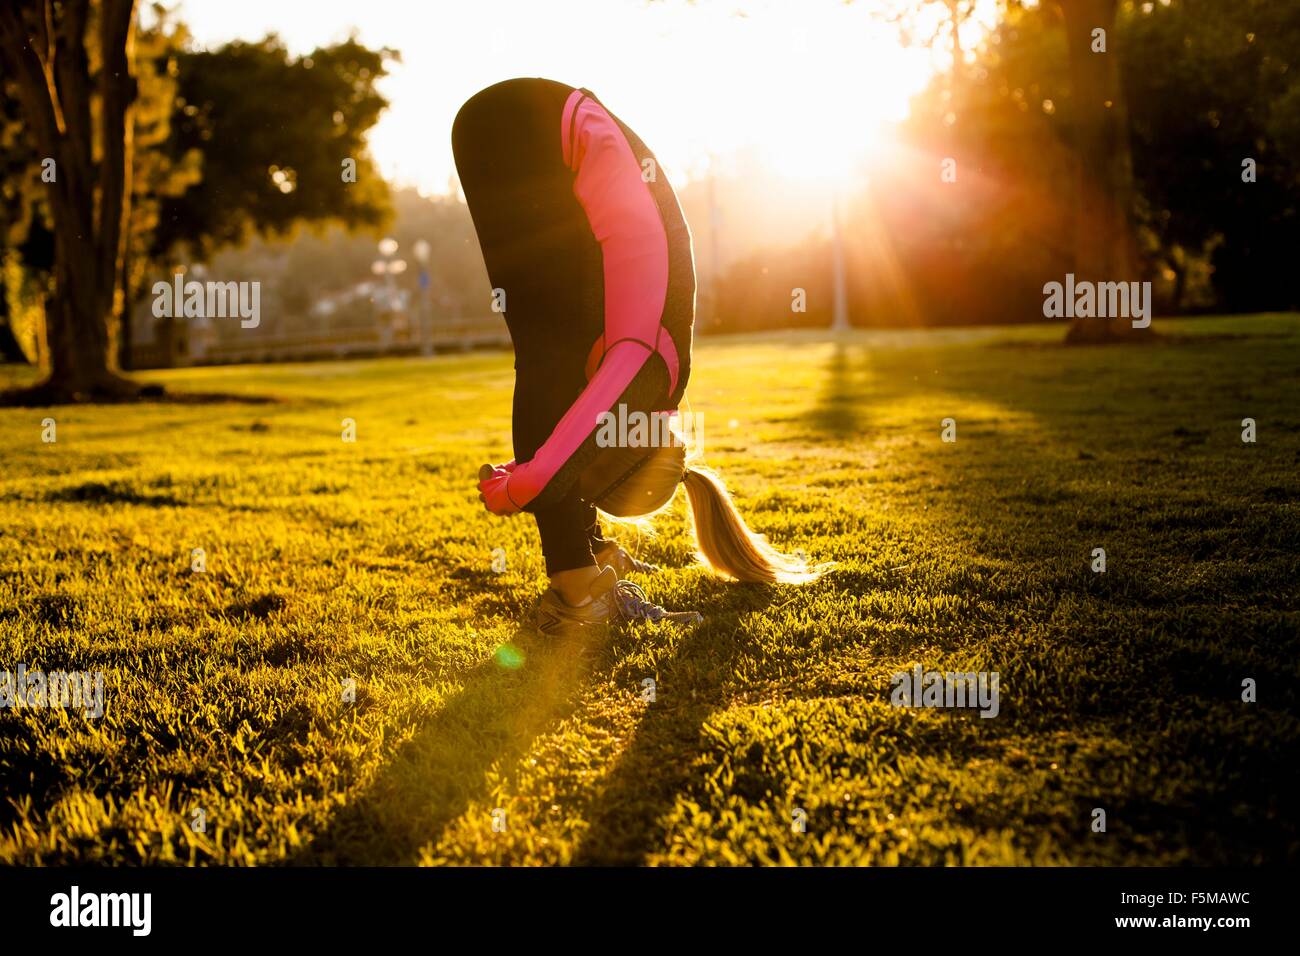 Woman stretching in park Banque D'Images